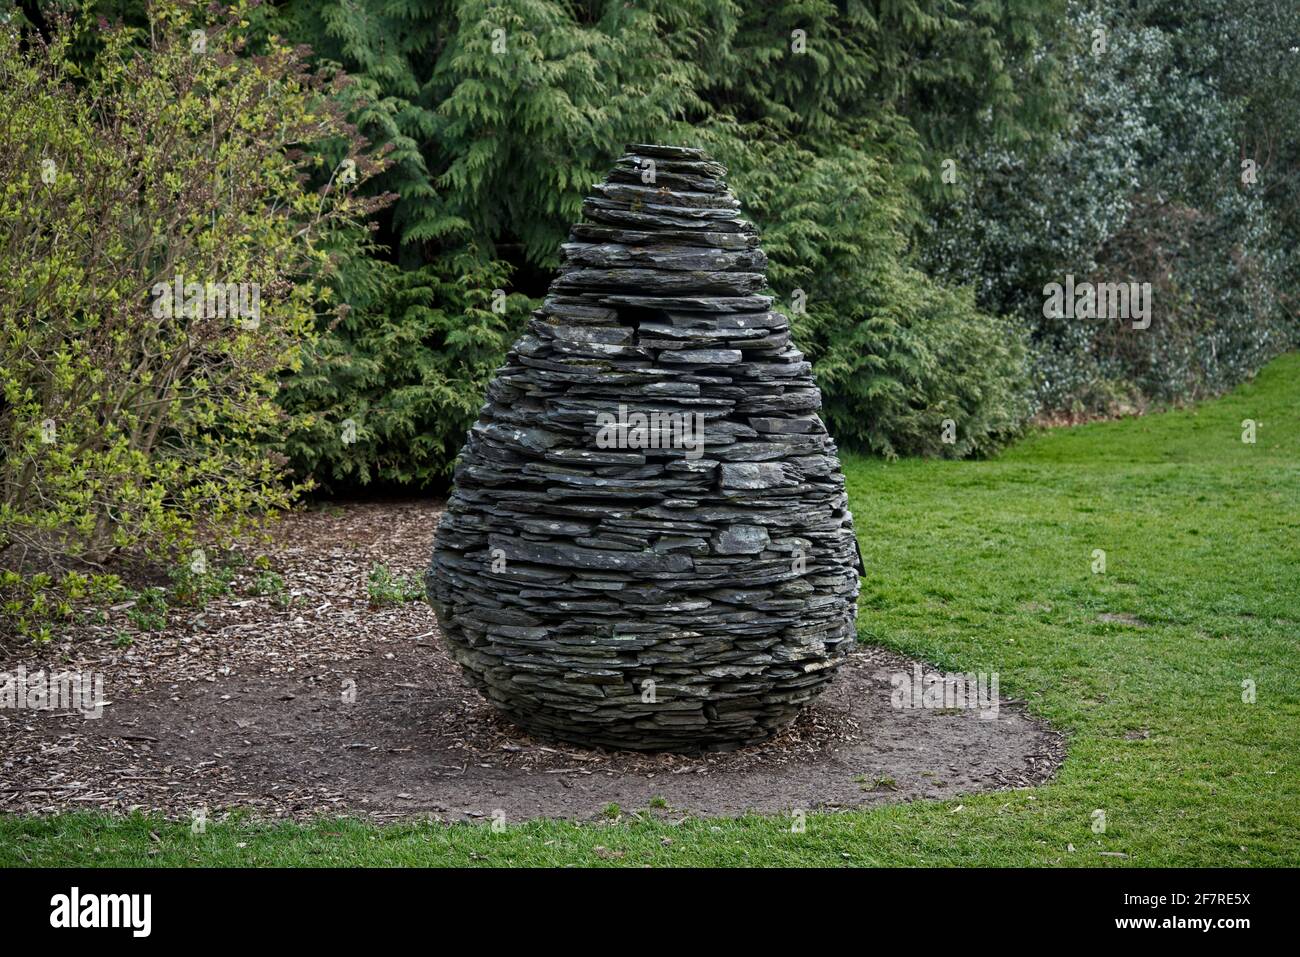 Slate Cone made from Ballachulish slate by British artist Andy Goldsworthy in the grounds of the Royal Botanic Garden Edinburgh, Scotland, UK. Stock Photo